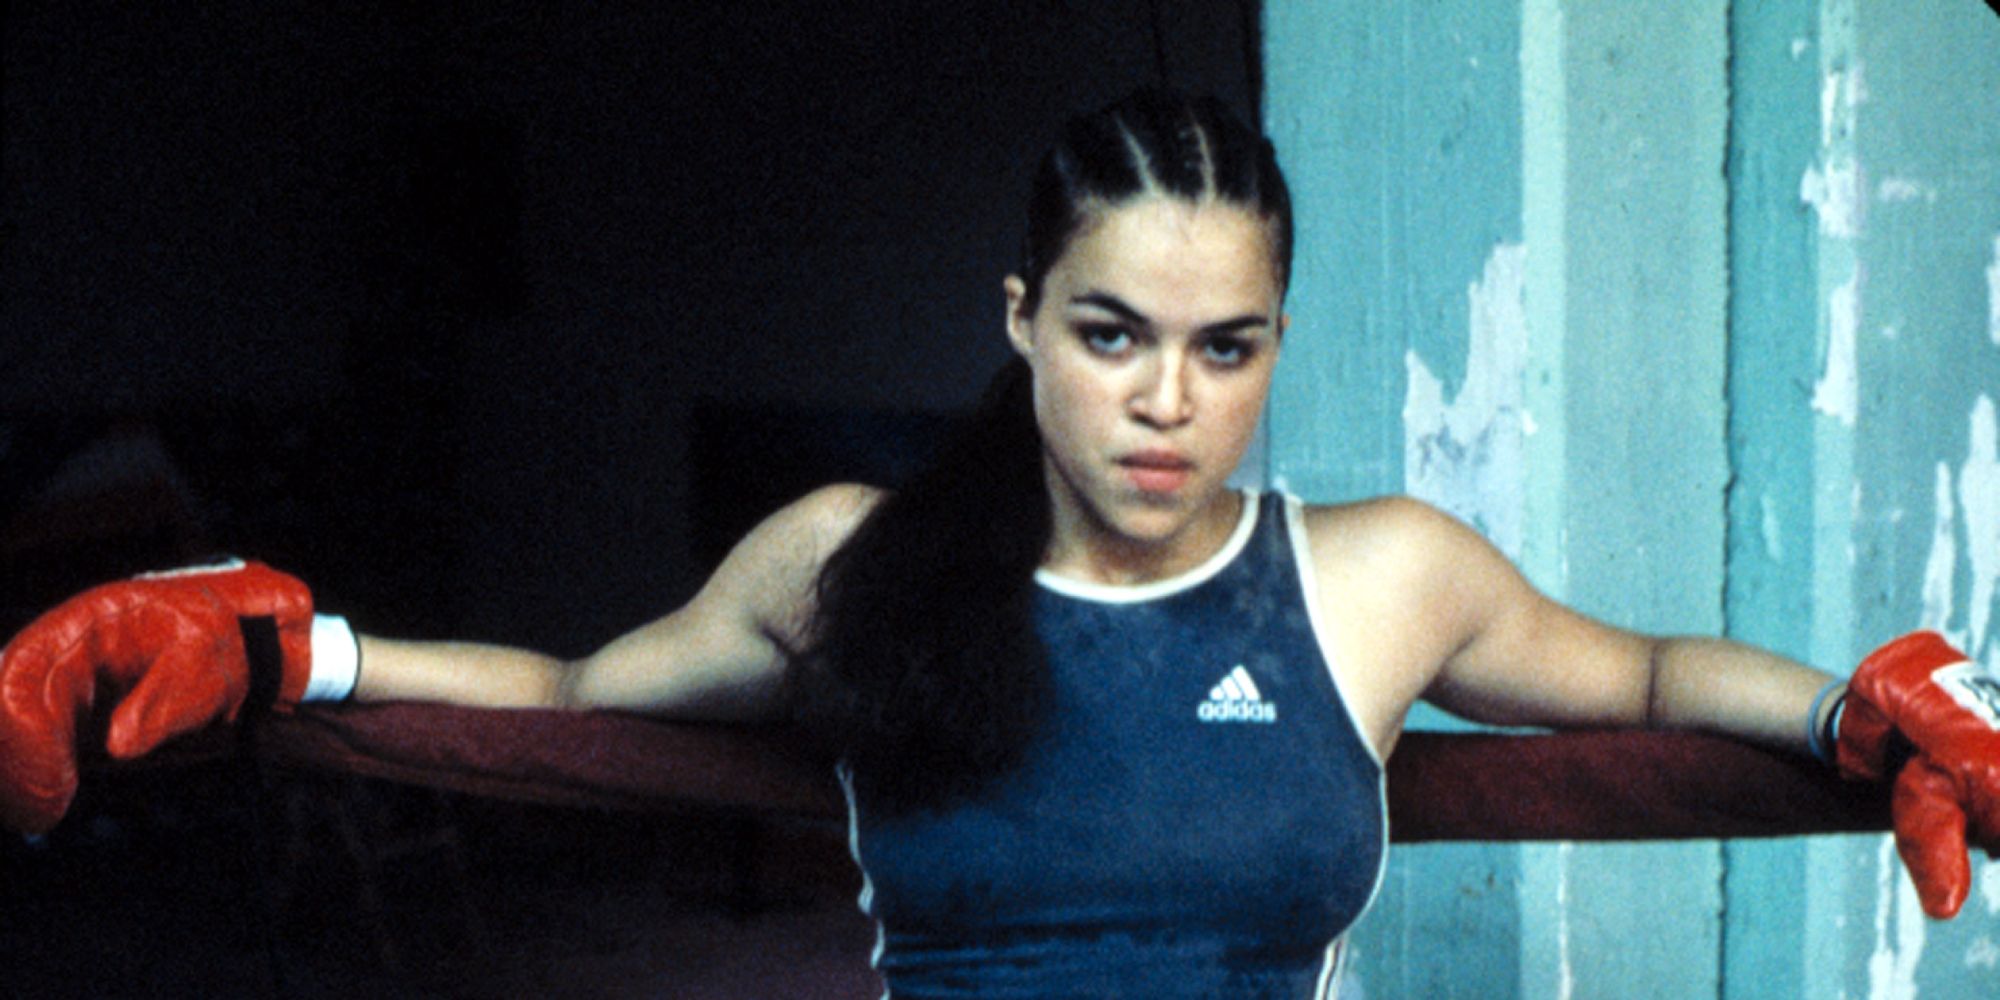 Michelle Rodriguez as Diana Guzman resting her arms in the boxing ring